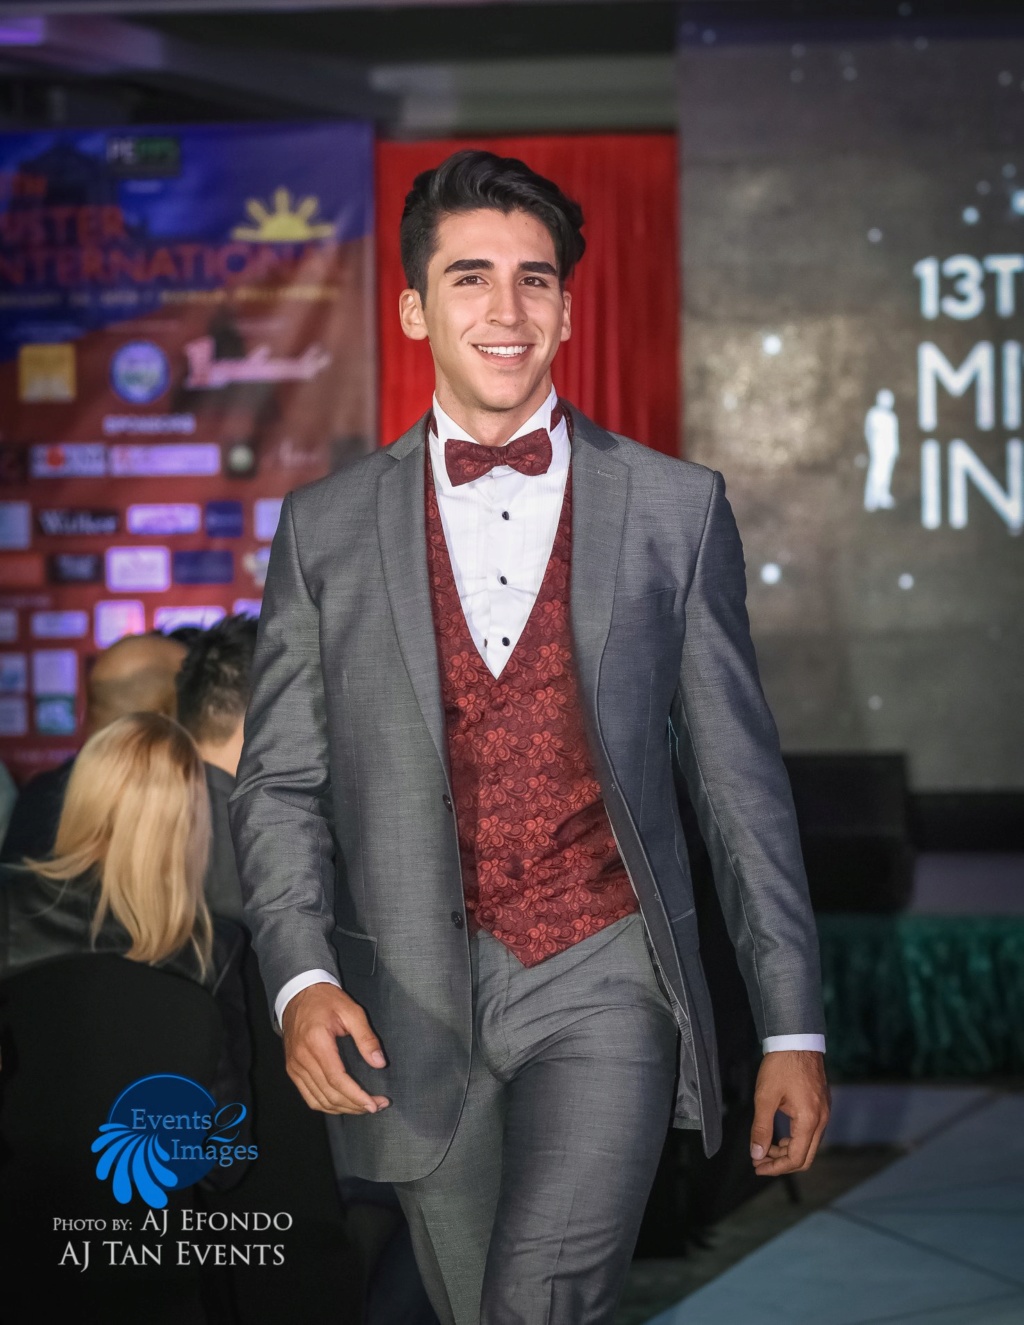 The 13th Mister International in Manila, Philippines on February 24,2019 - Page 10 52828010